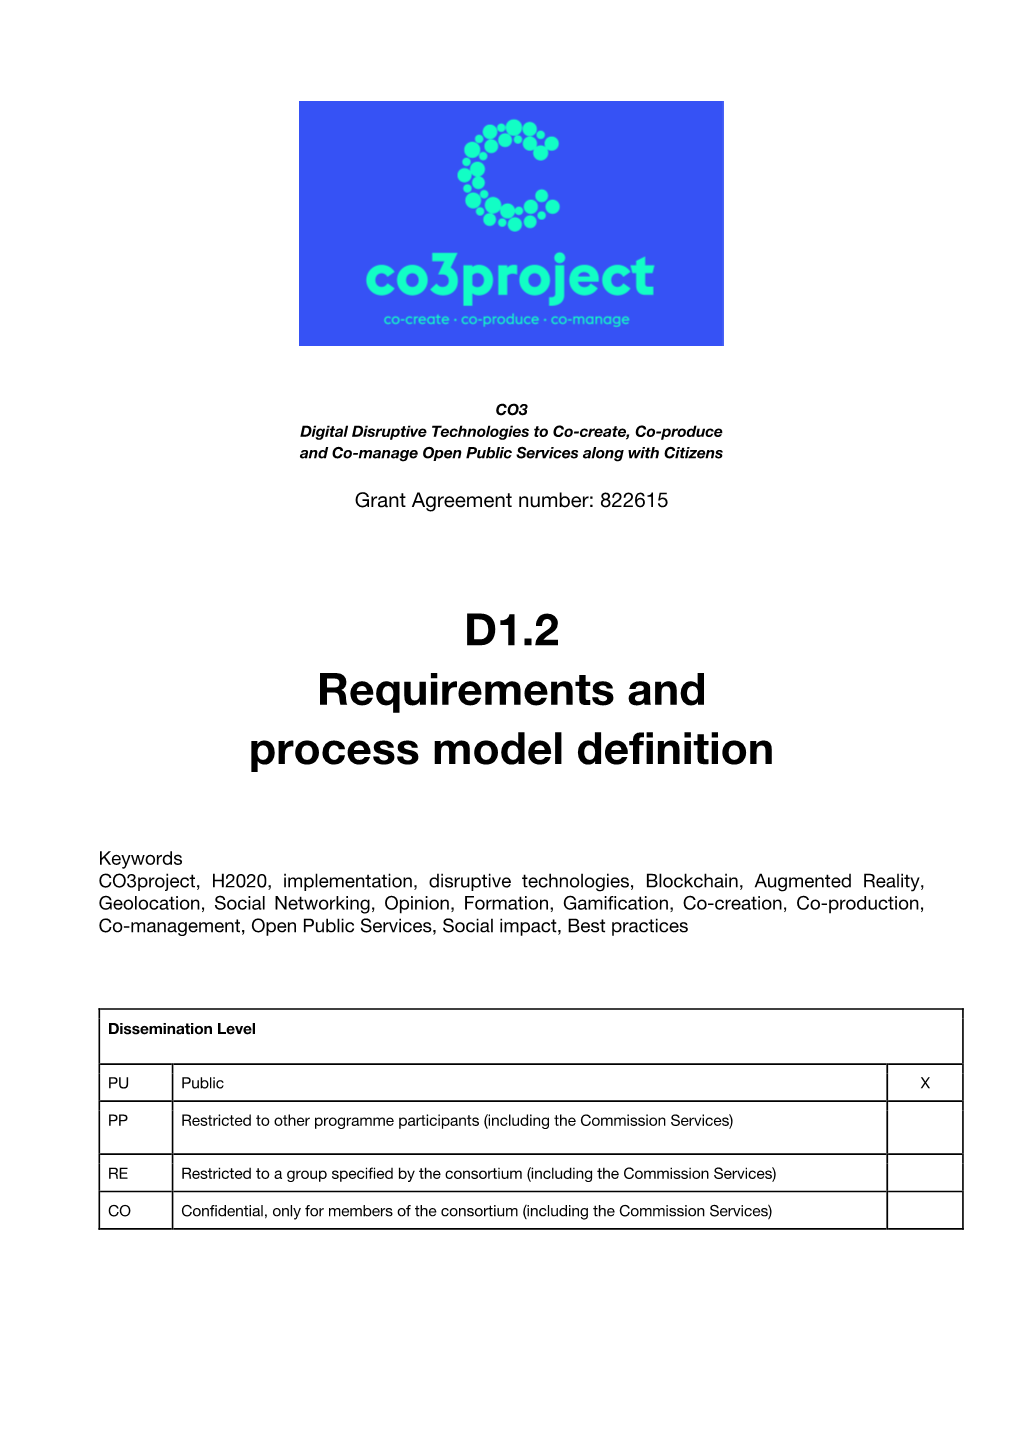 D1.2 Requirements and Process Model Definition